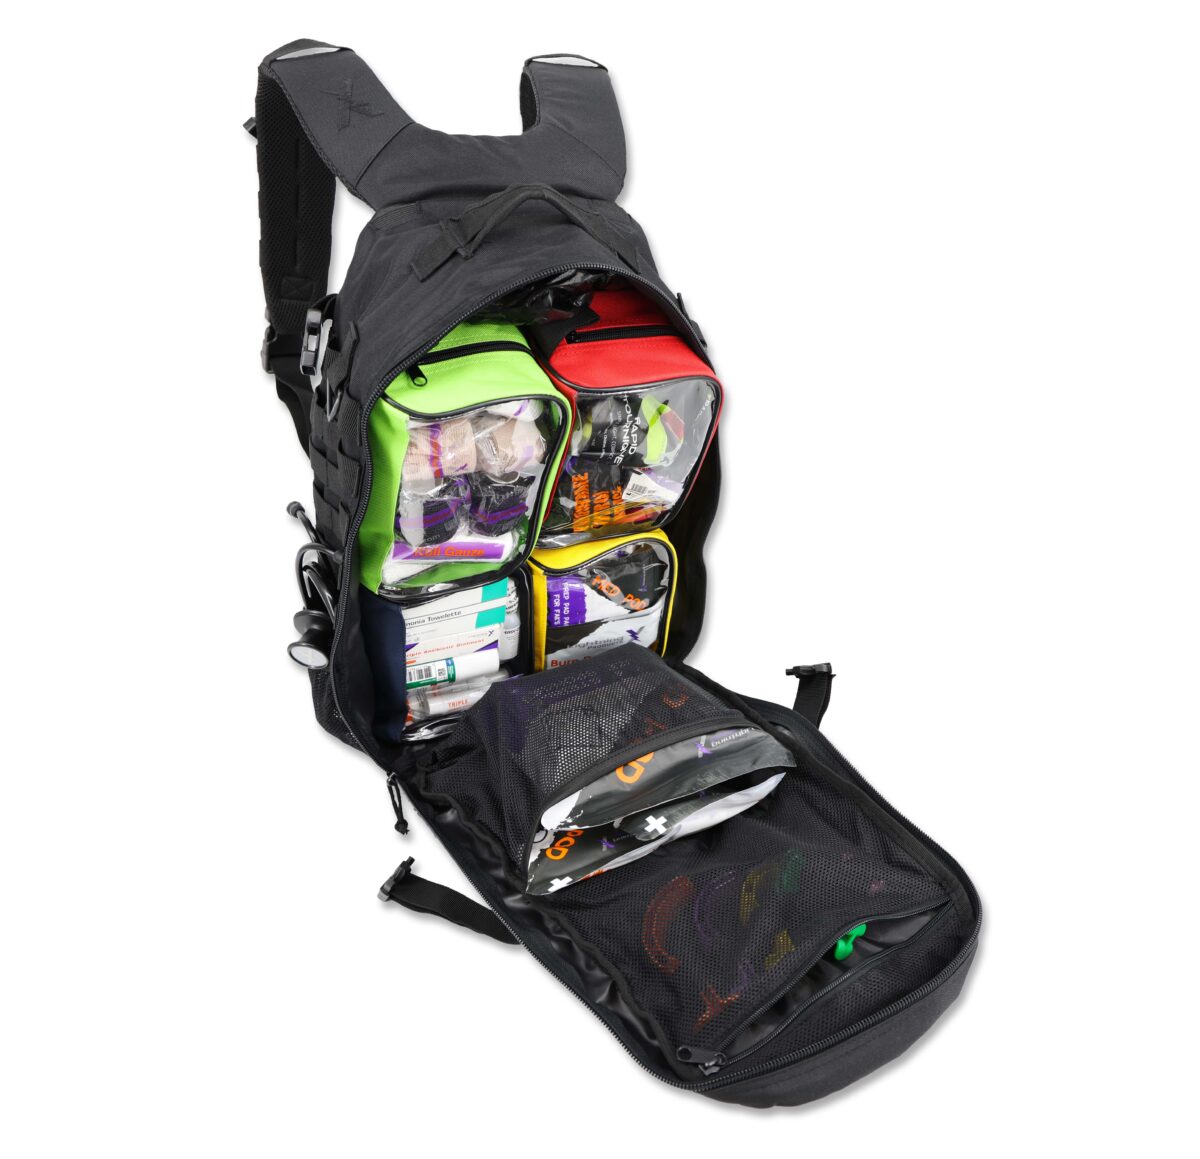 Lightning X premium tacmed molle trauma backpack kit fully stocked gear bag for ems emt first responder w/ first aid supplies including quikclot, tourniquet, israeli bandage, nasal airways and professional medical supplies with removable colored organizer pouches